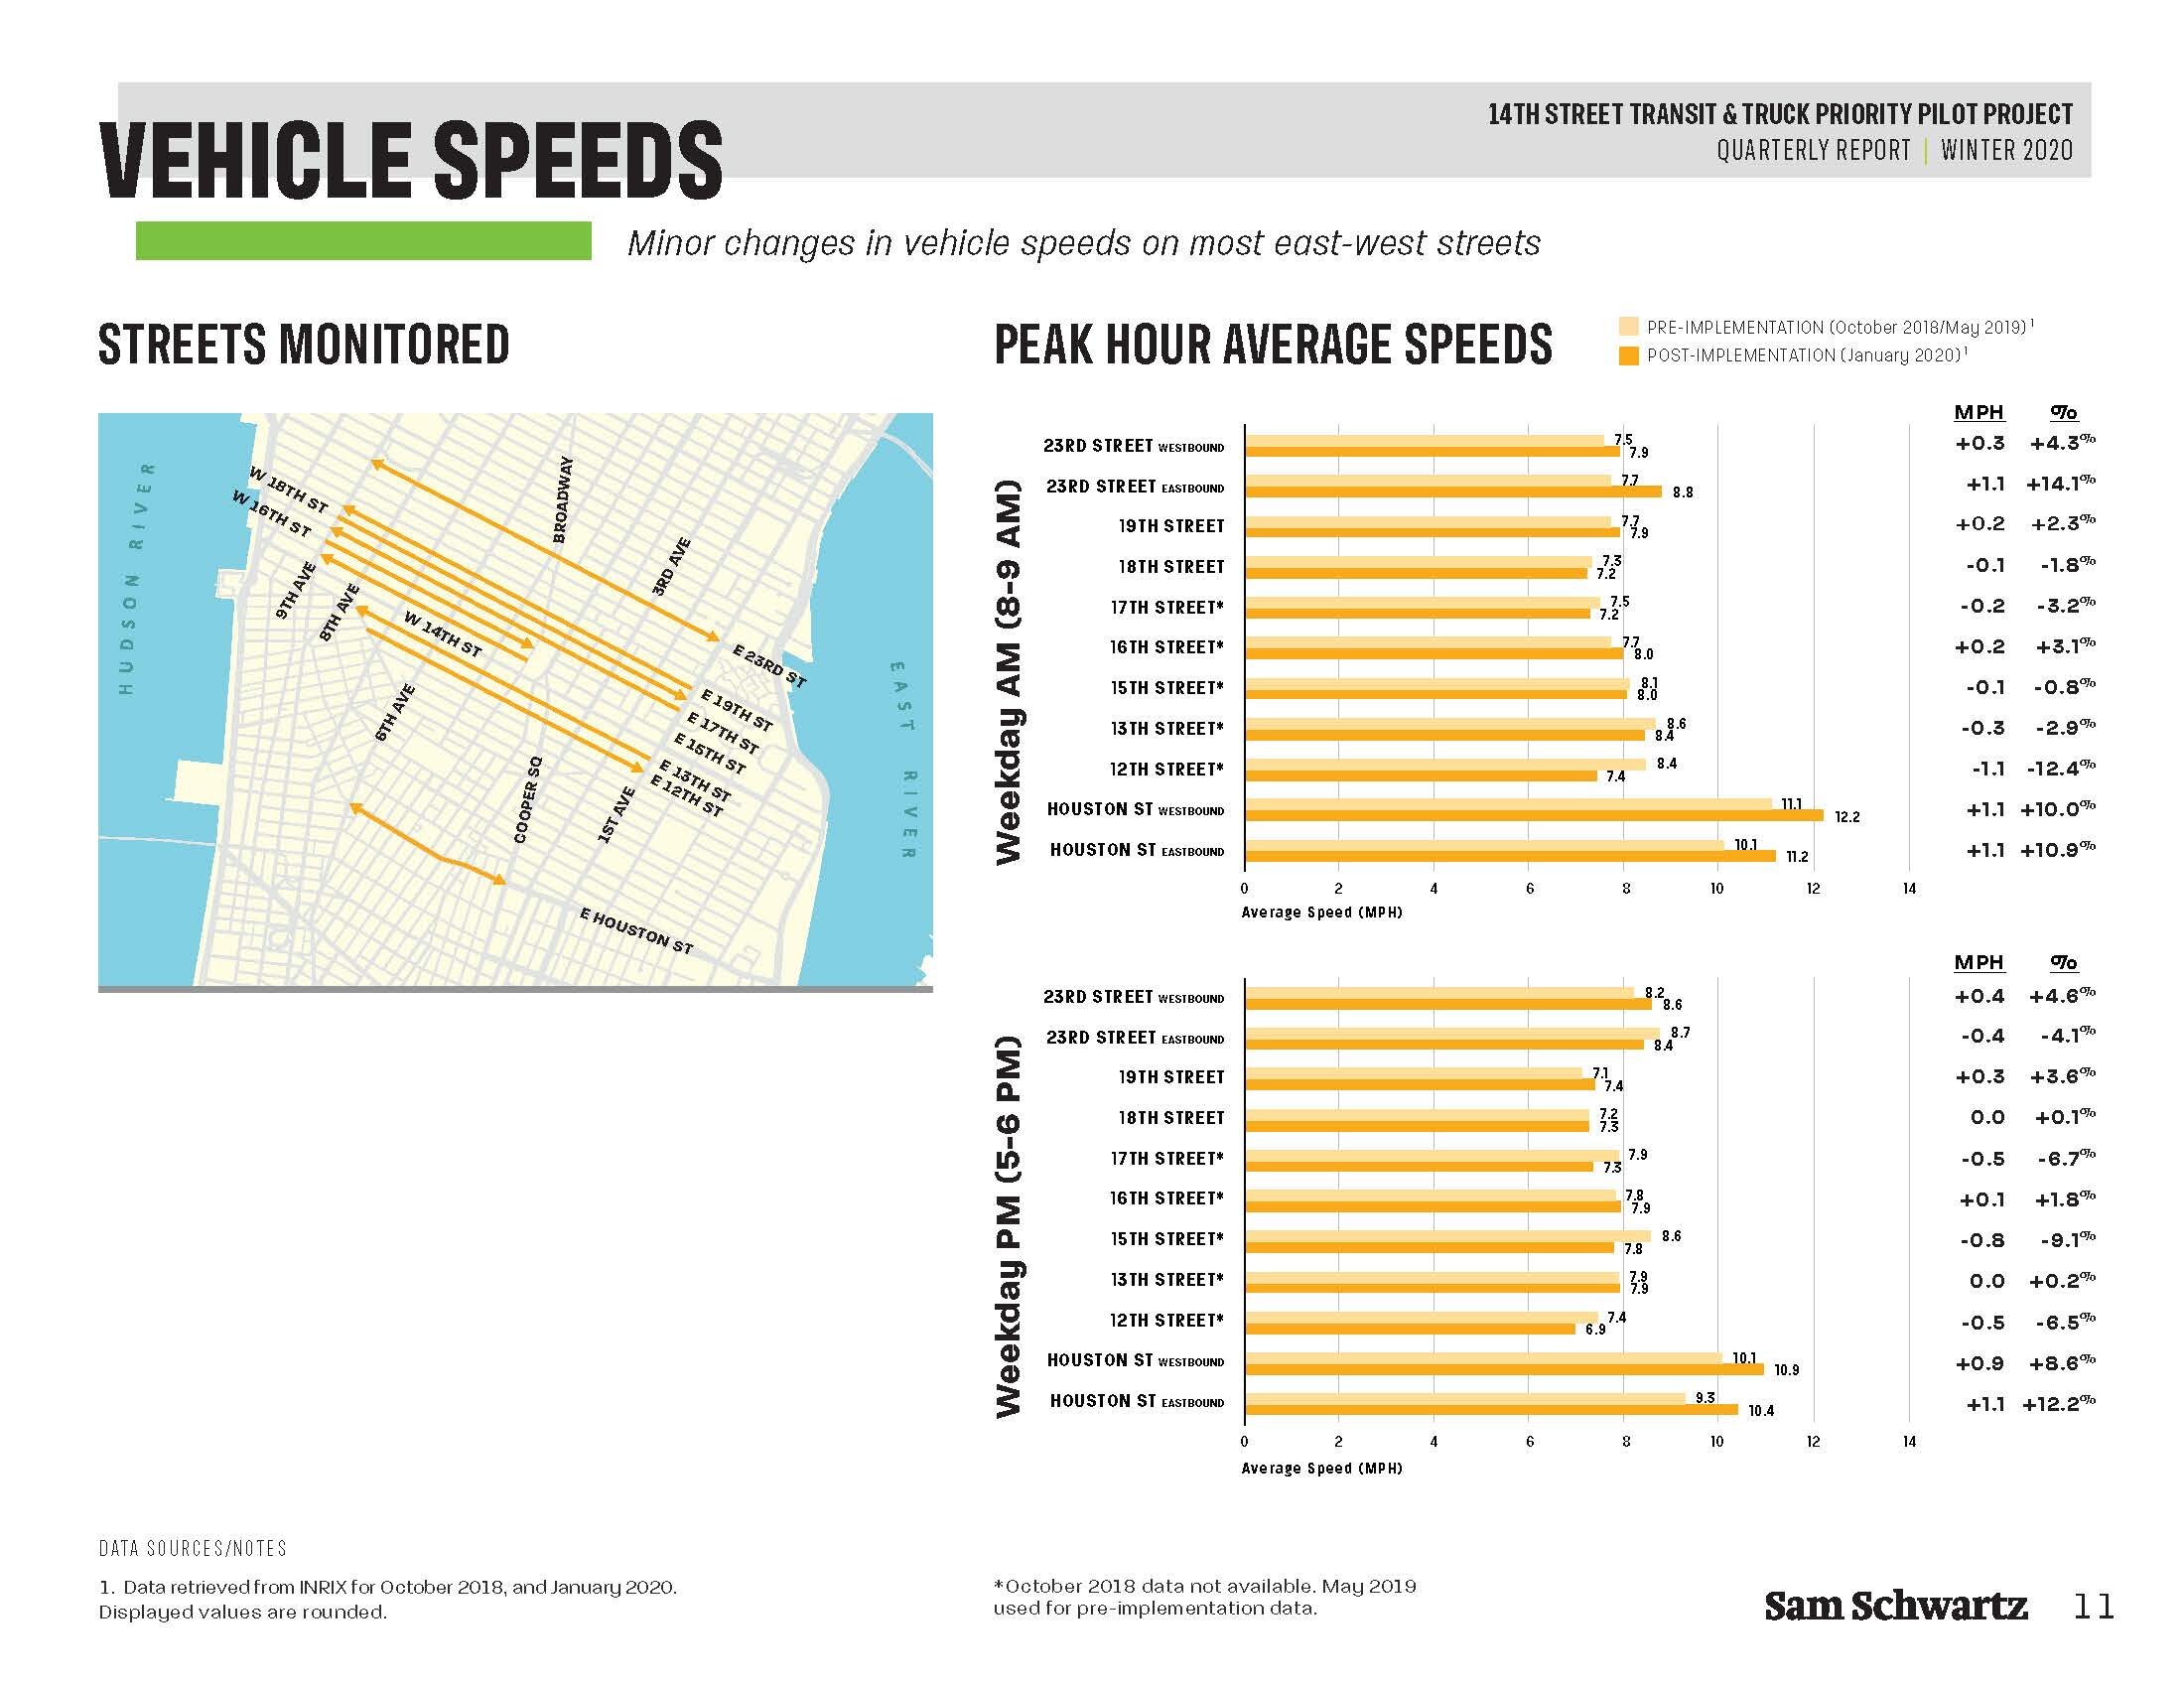 speeds Pages from 14 Street Report 2 Winter 2020-5.jpg